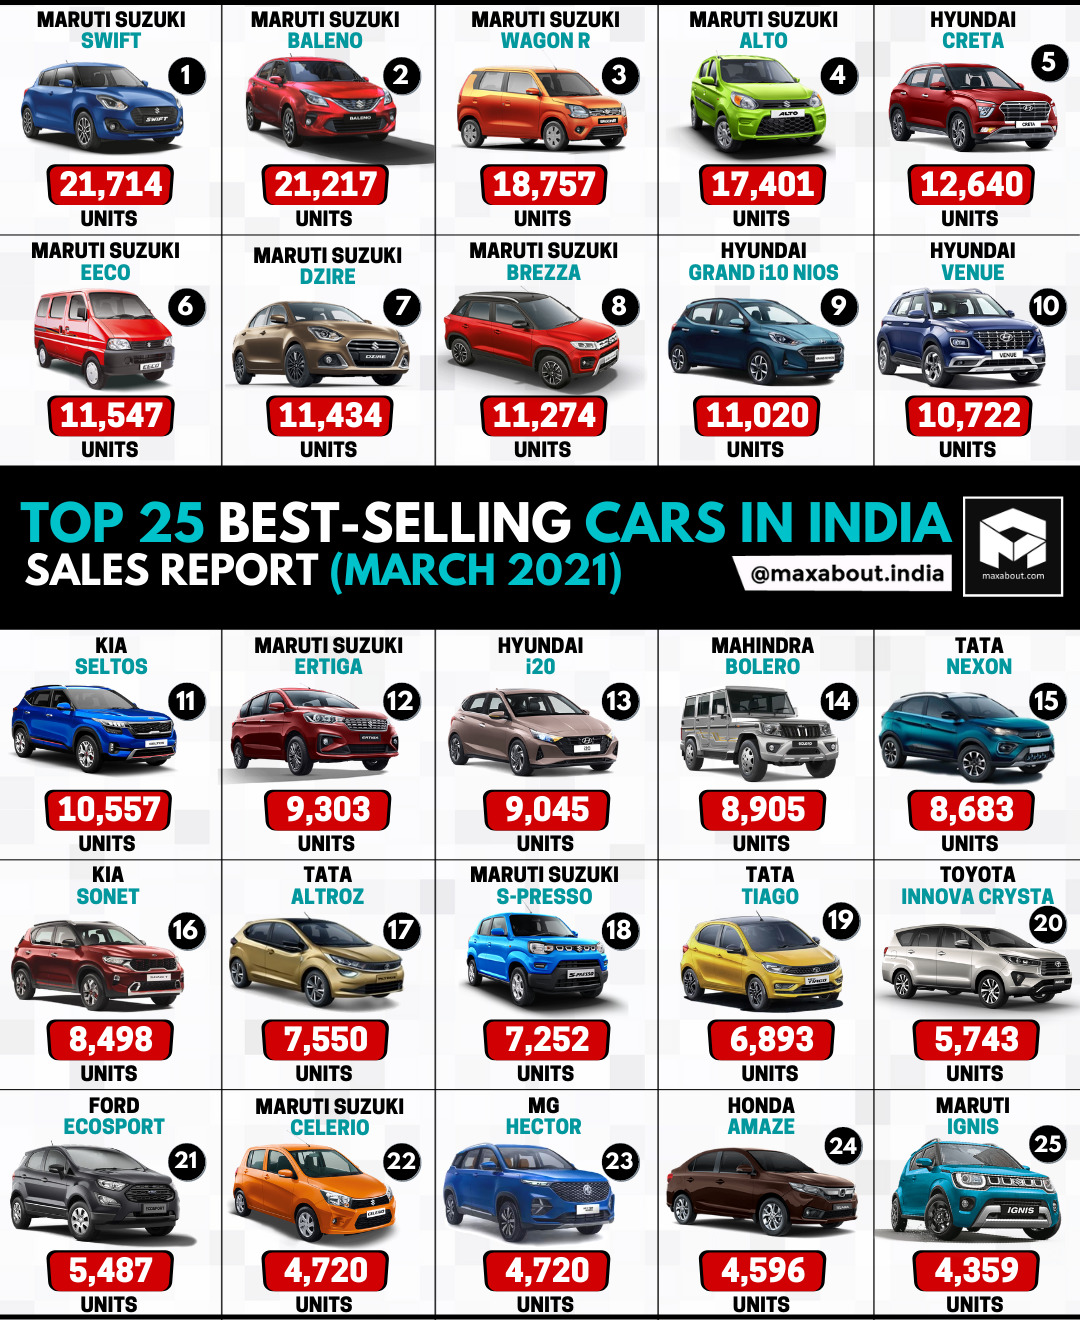 Top 25 BestSelling Cars in India (March 2021)